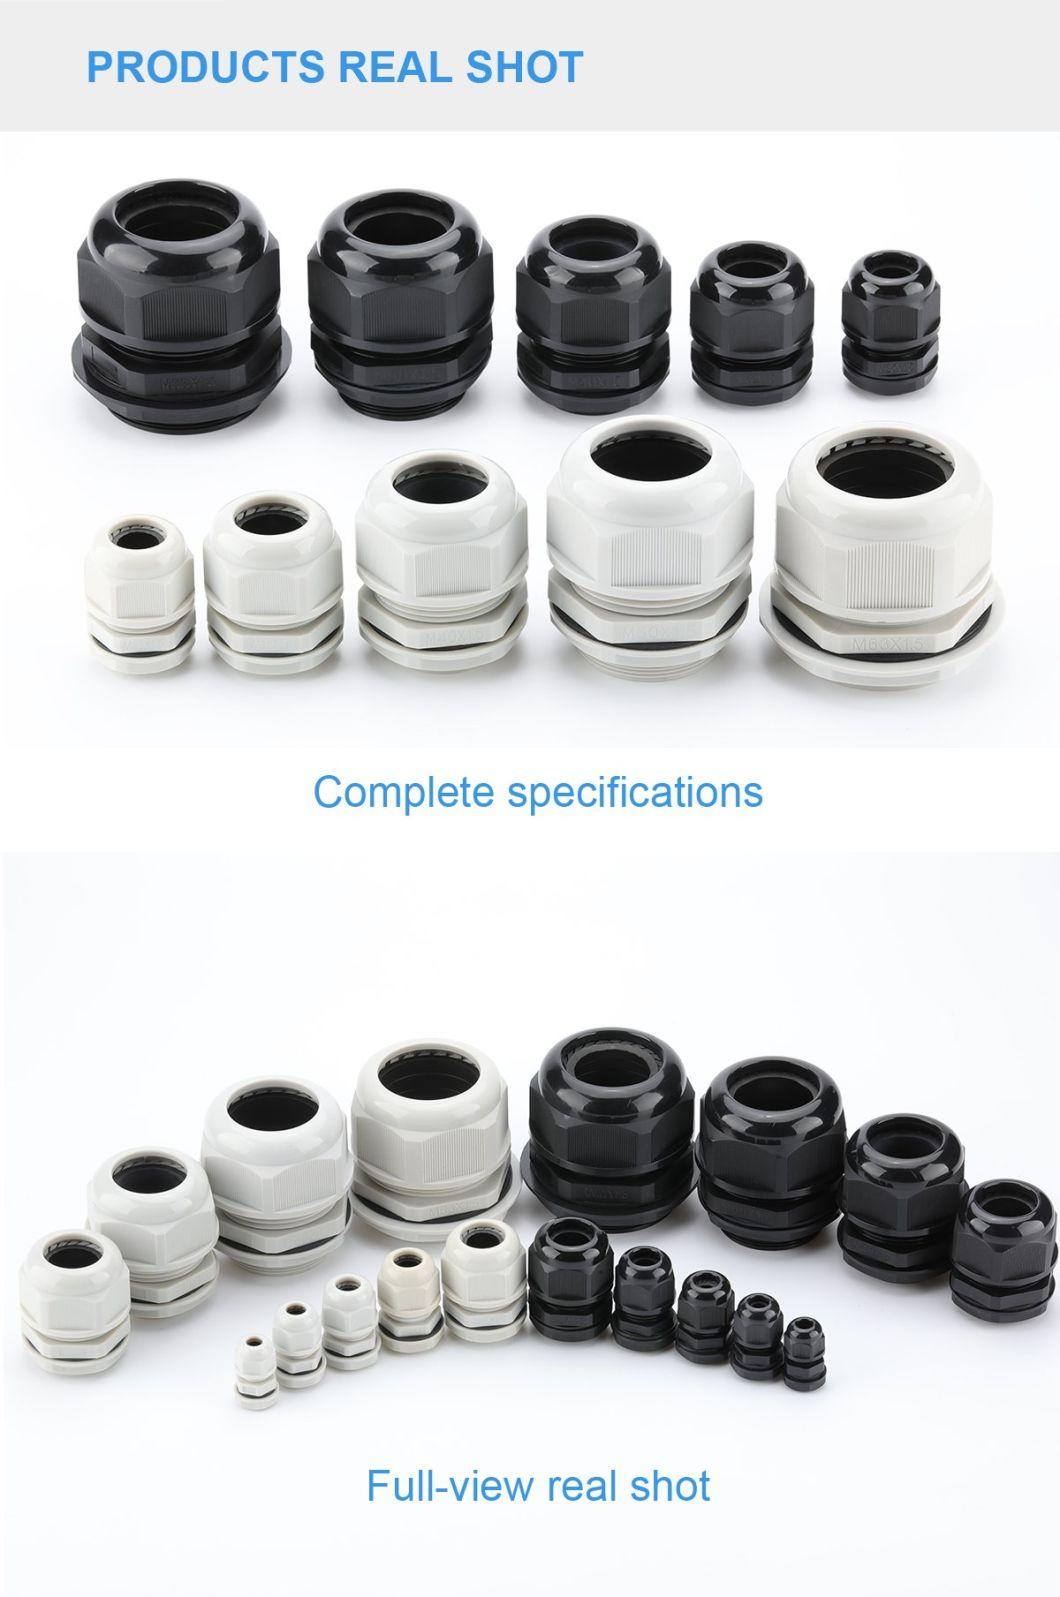 Pg/M Plastic Nylon Explosion Proof IP68 Cable Gland